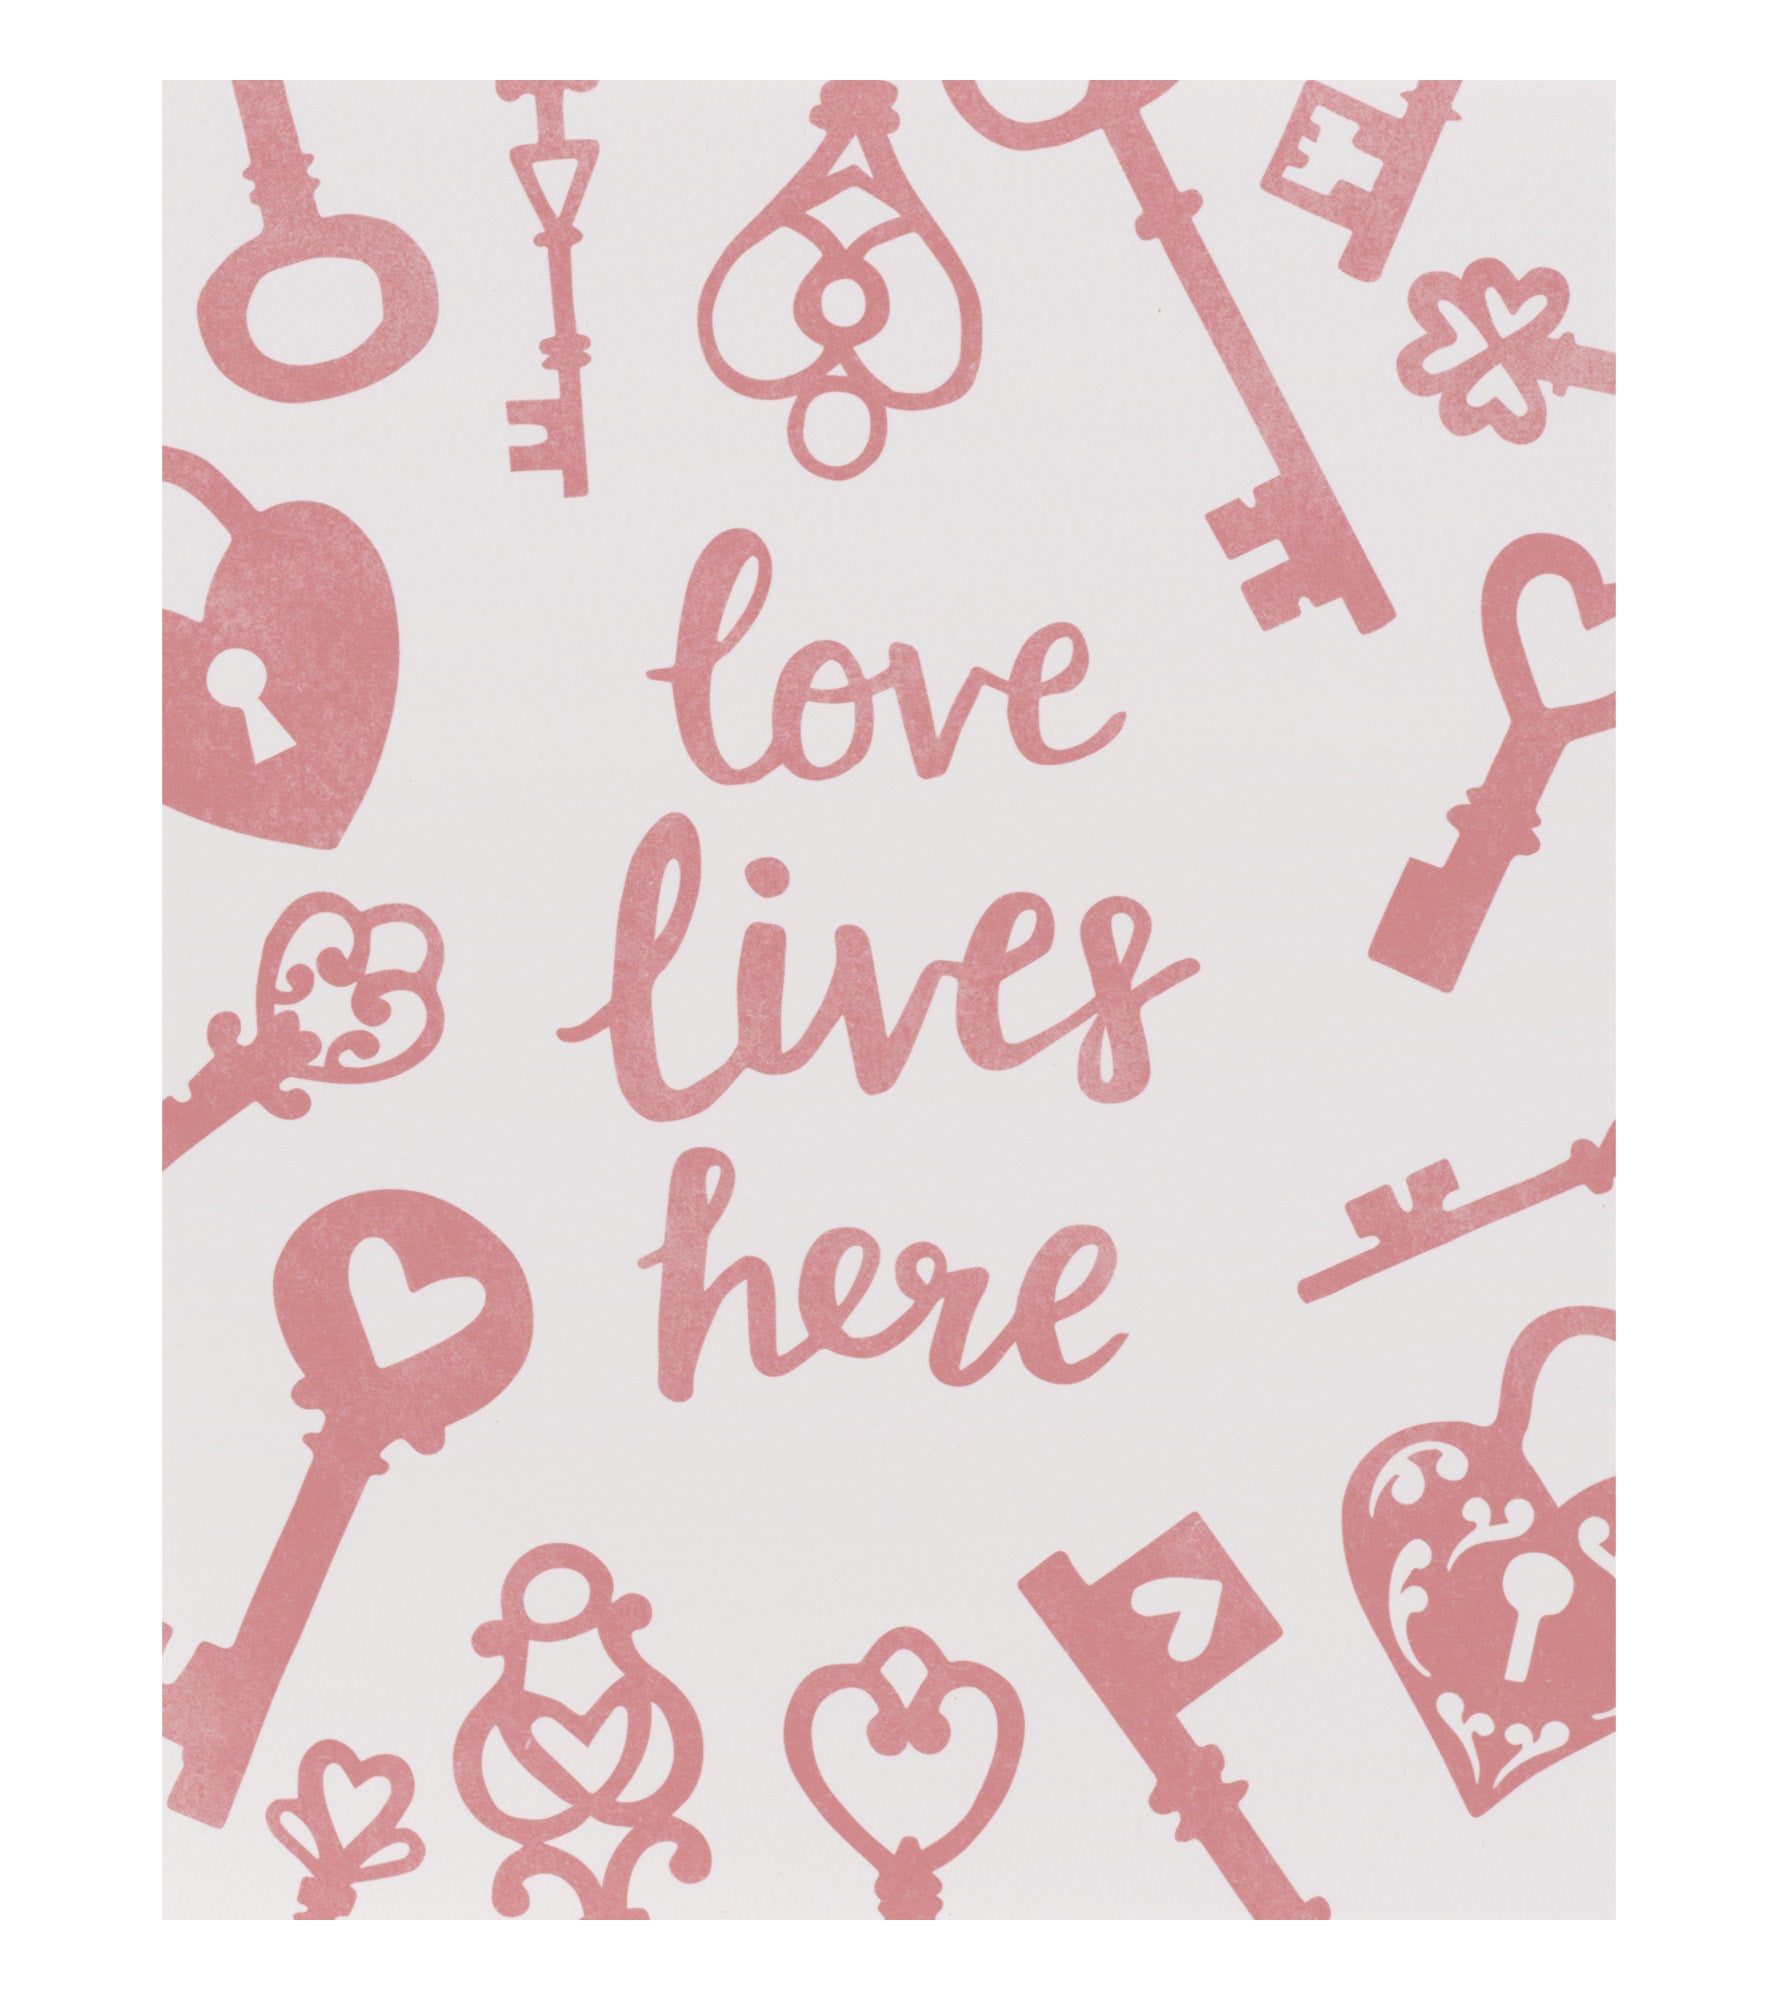 'Love Lives Here' unframed A4 print by Megan Tucker - Pink